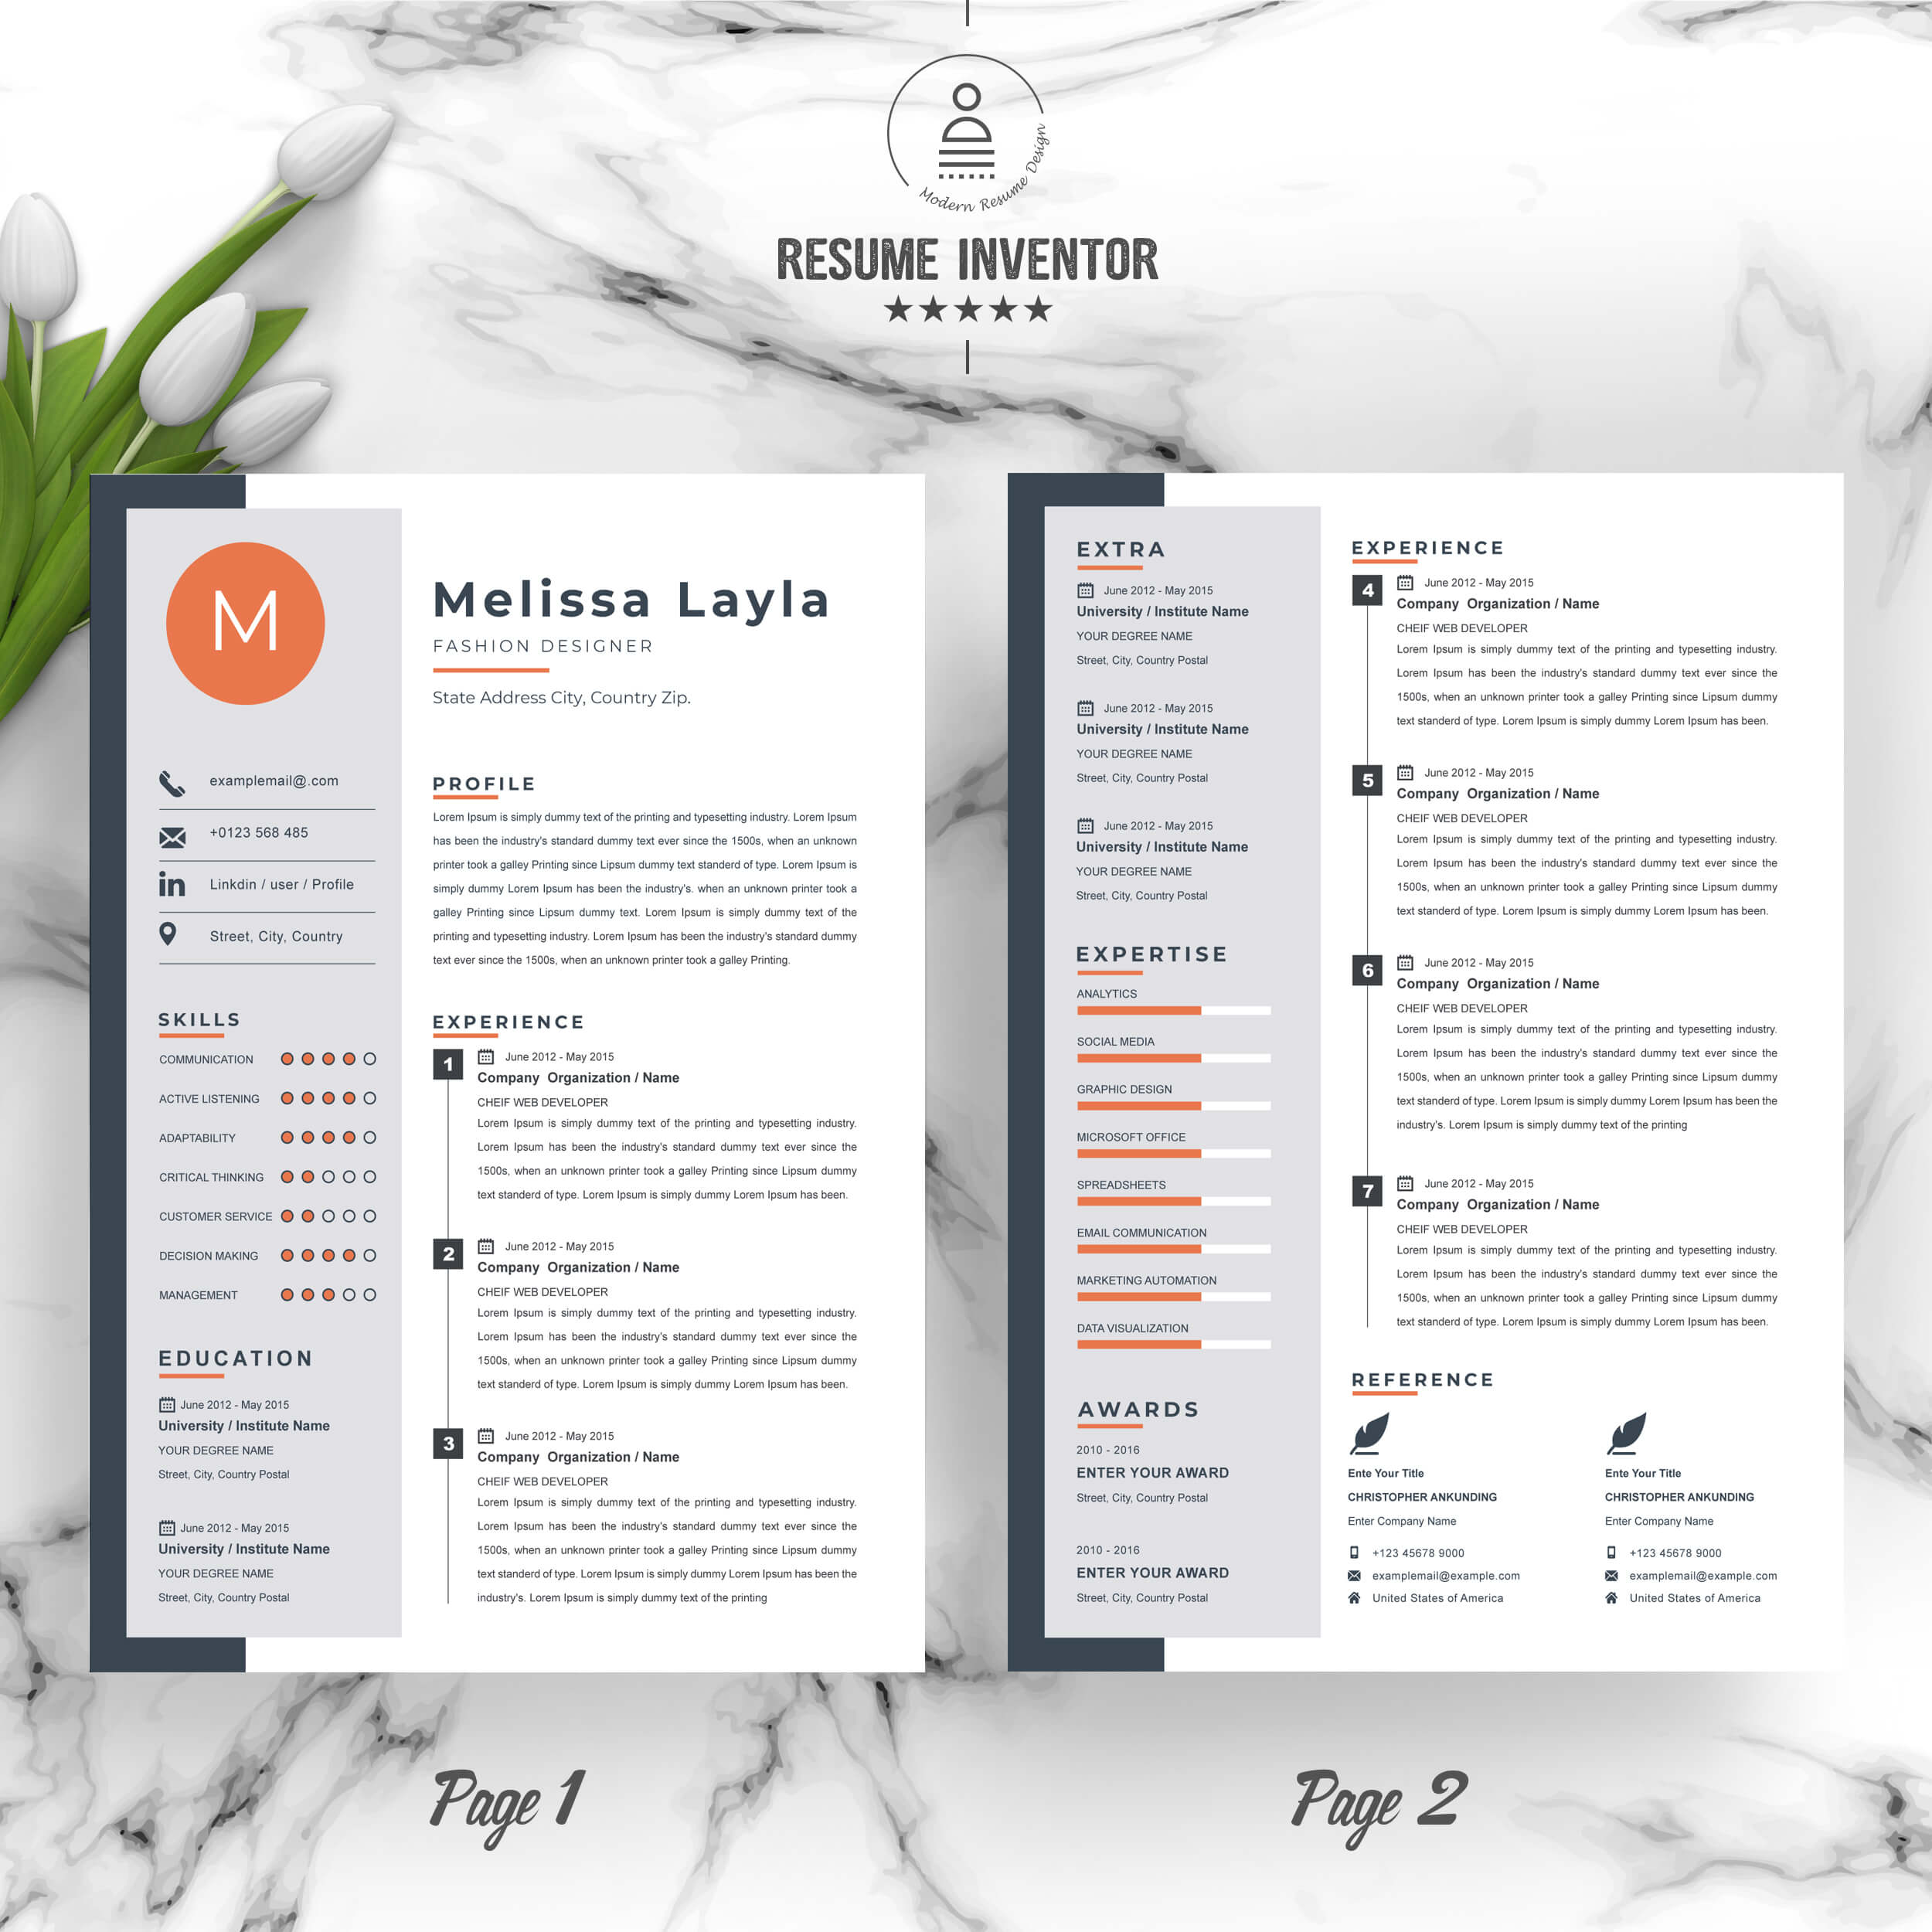 Fashion Designer Resume Template | Modern Resume Template With Cover Letter preview image.